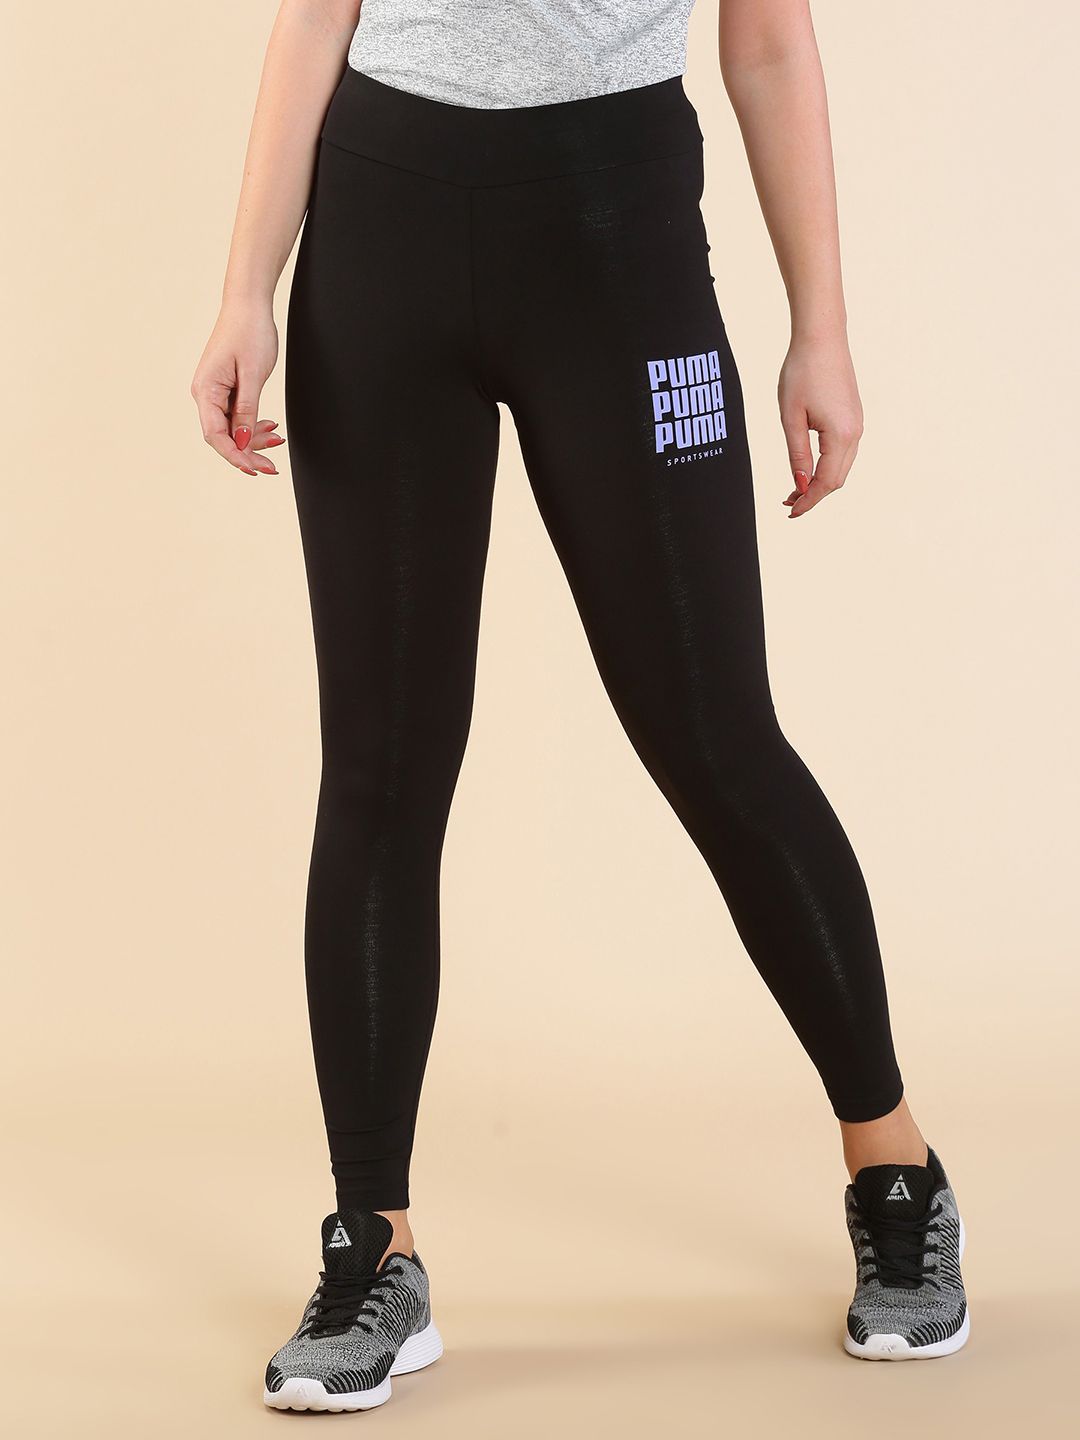 Puma Women Black Brand Logo Wmn Graphic Cropped Tights Price in India